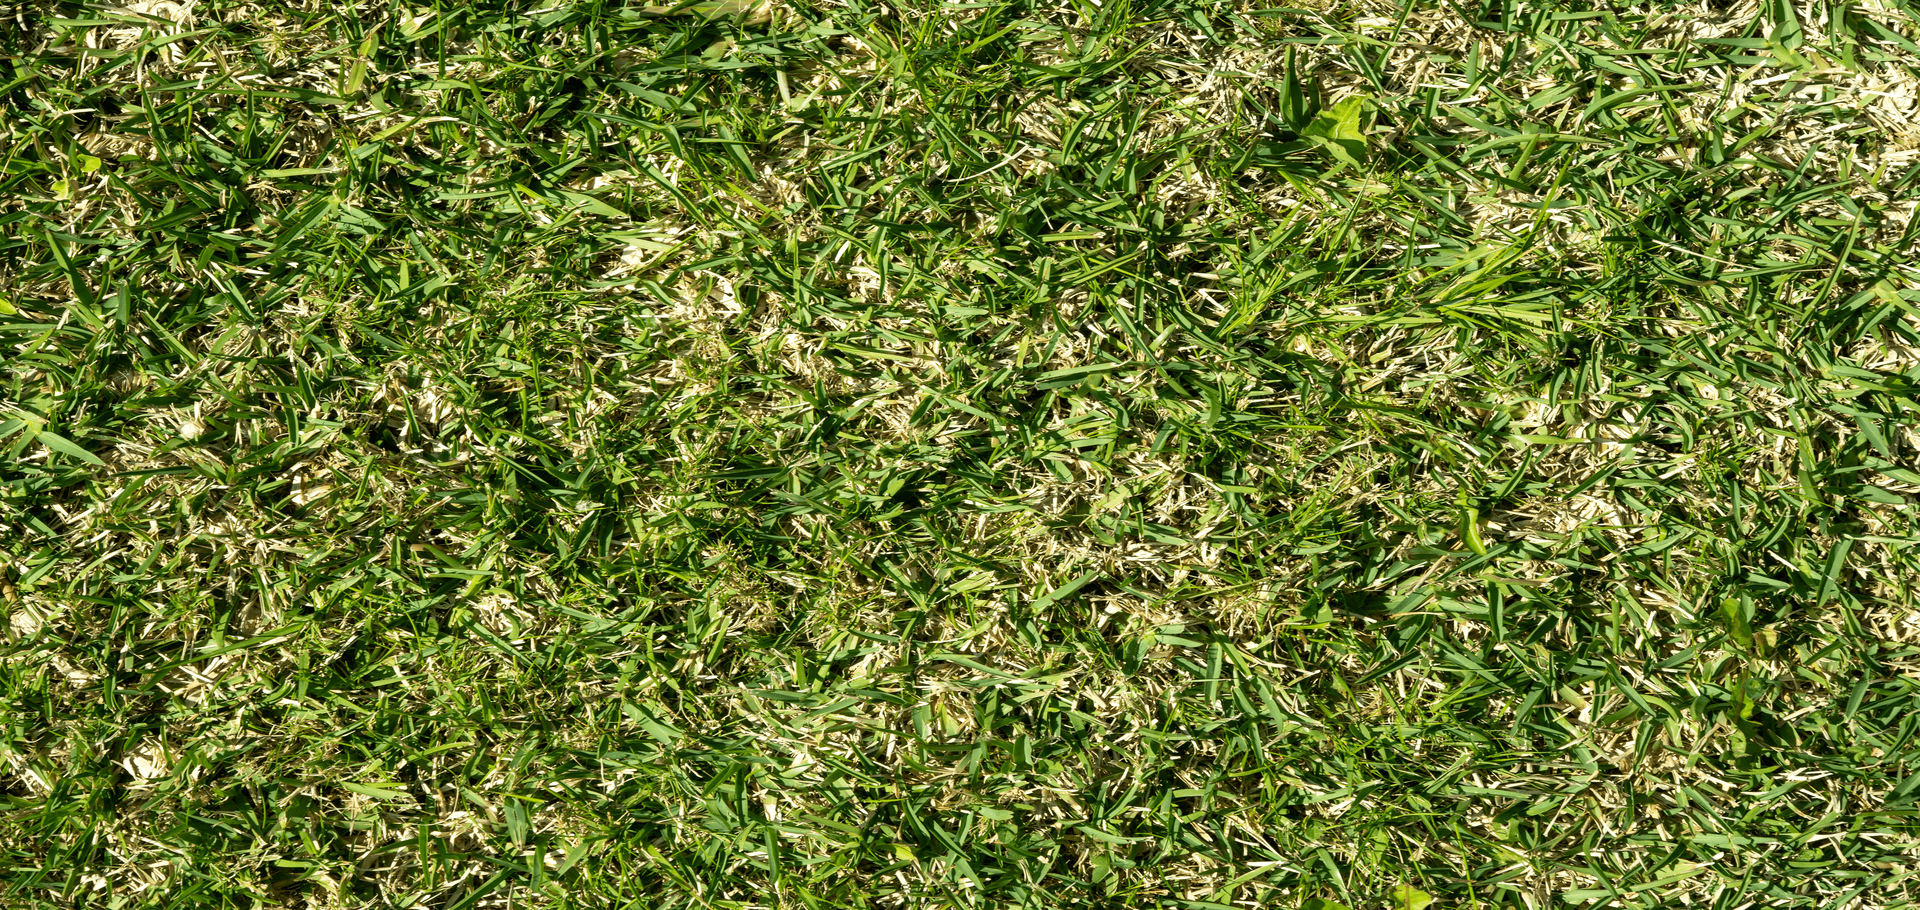 How to care for st. augustine grass